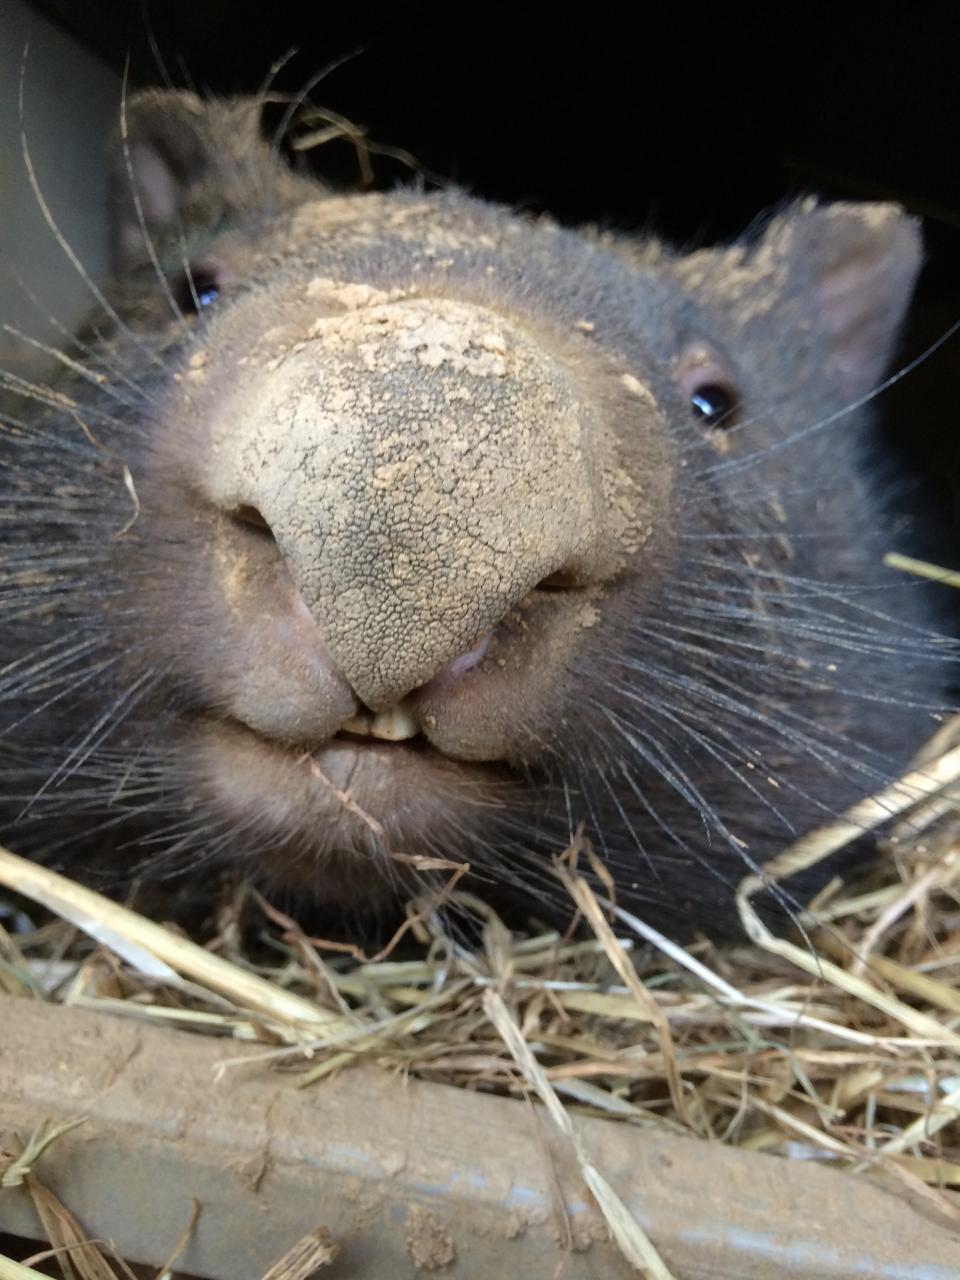 A close up of a wombat's face.